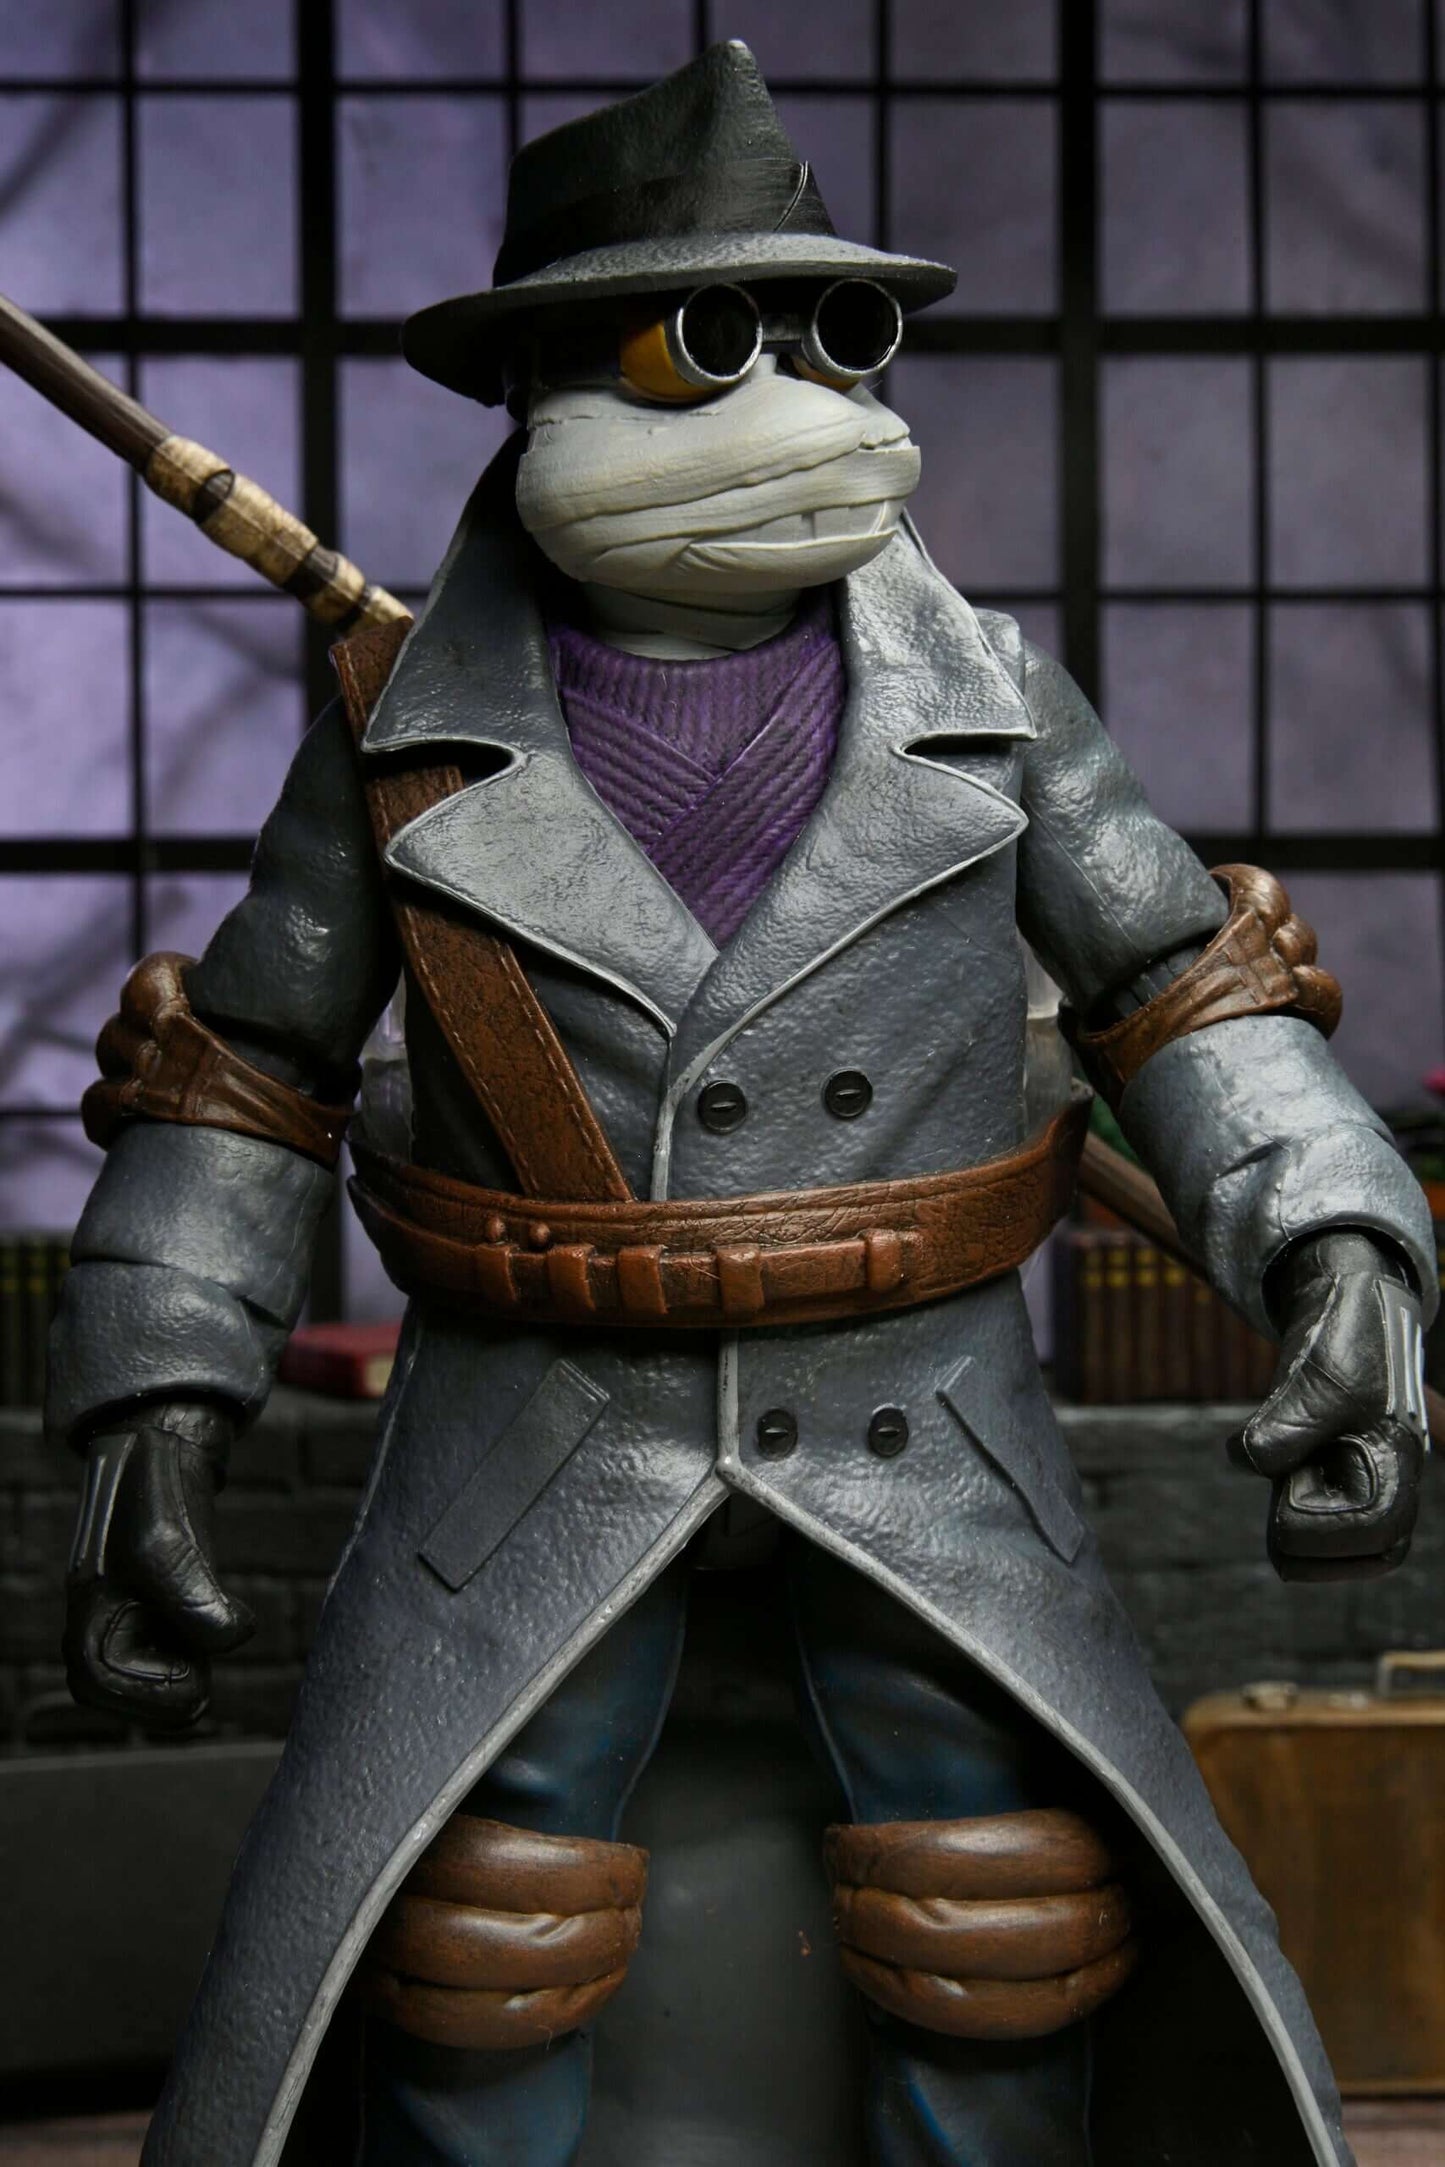 TMNT x Universal Monsters – Donatello as The Invisible Man